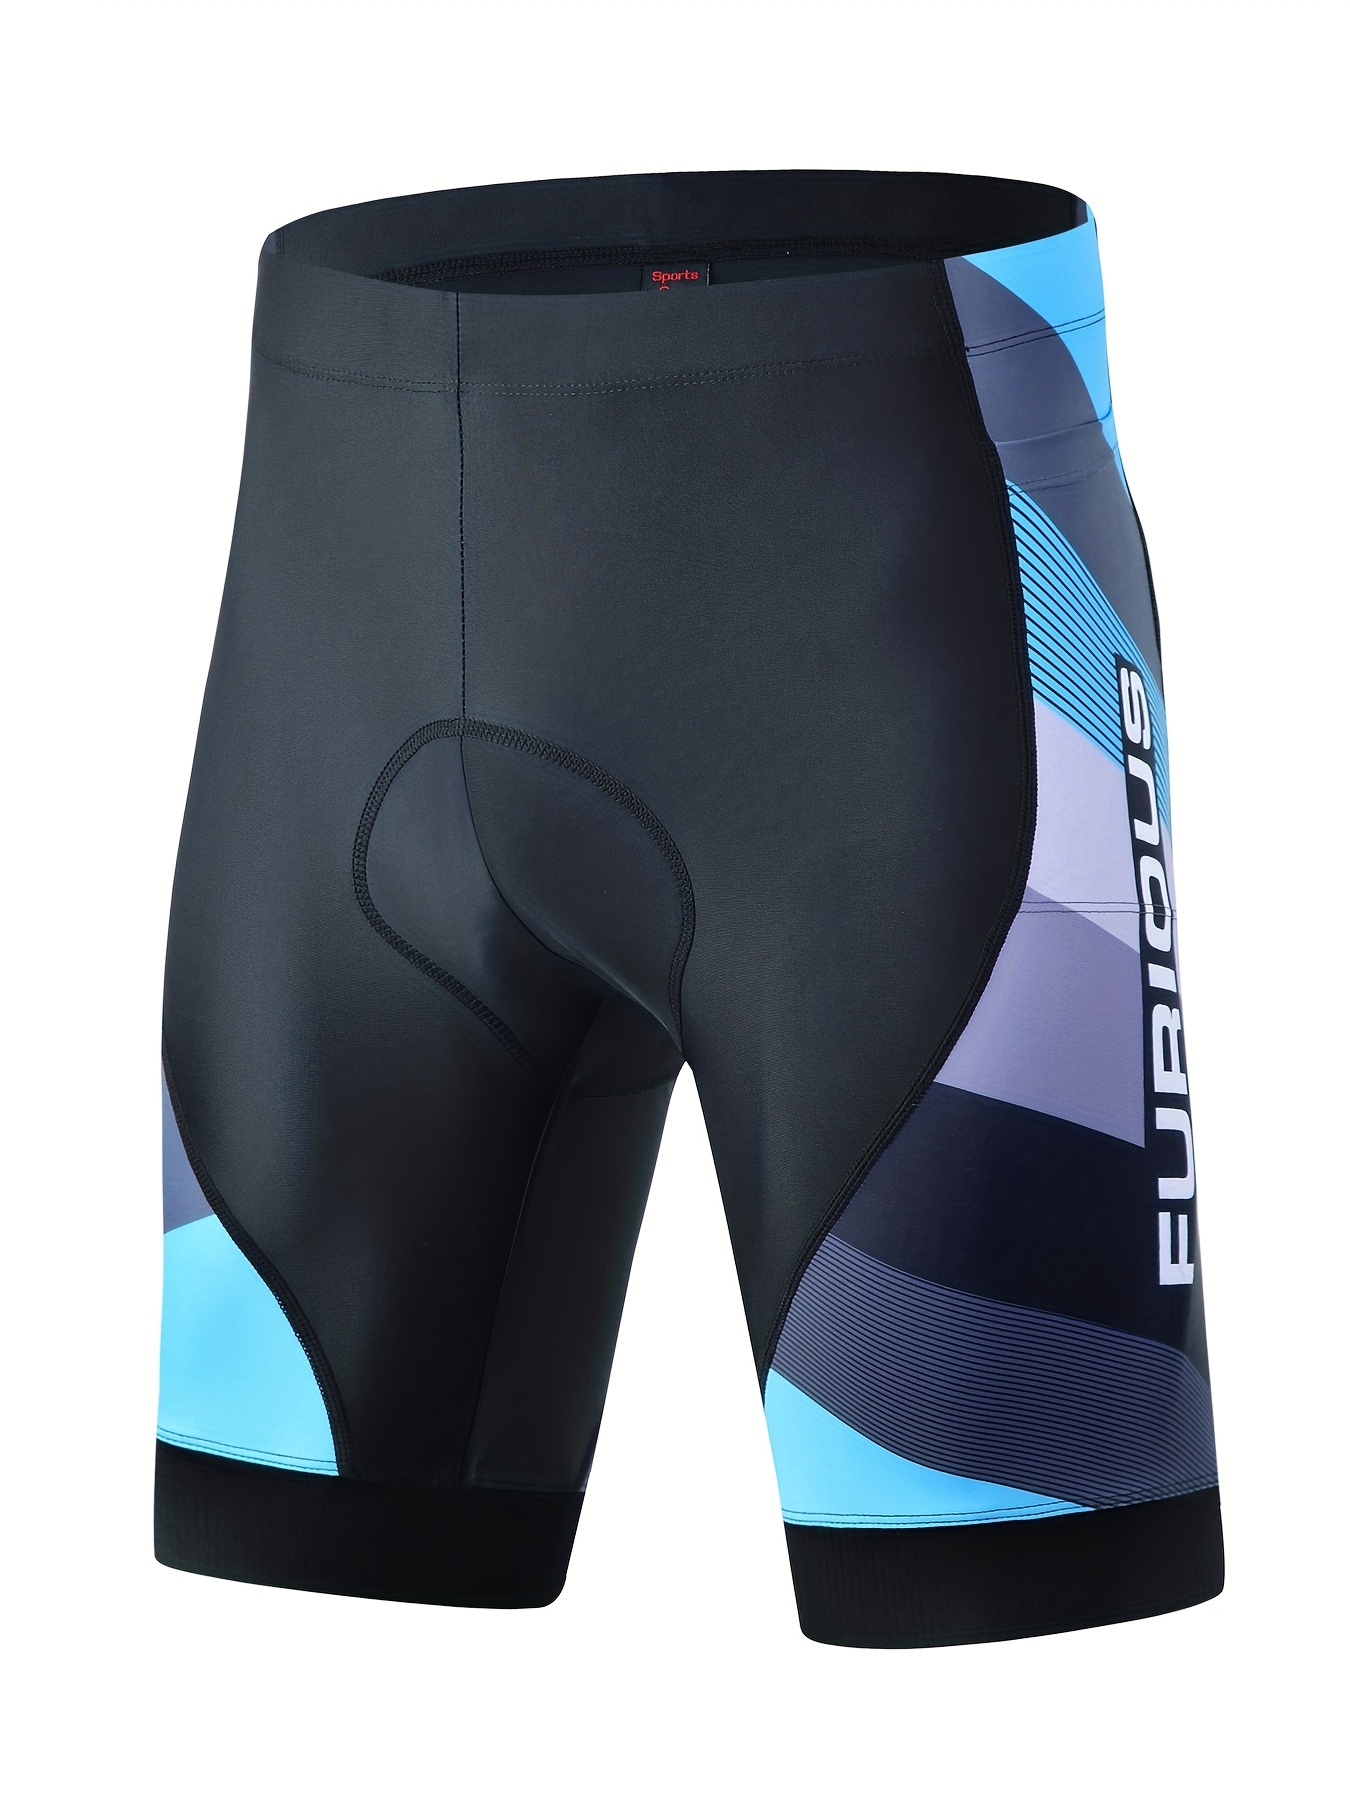 FYA Men's Cycling Shorts,4D Gel Padded Out-Wearable Motorcycle